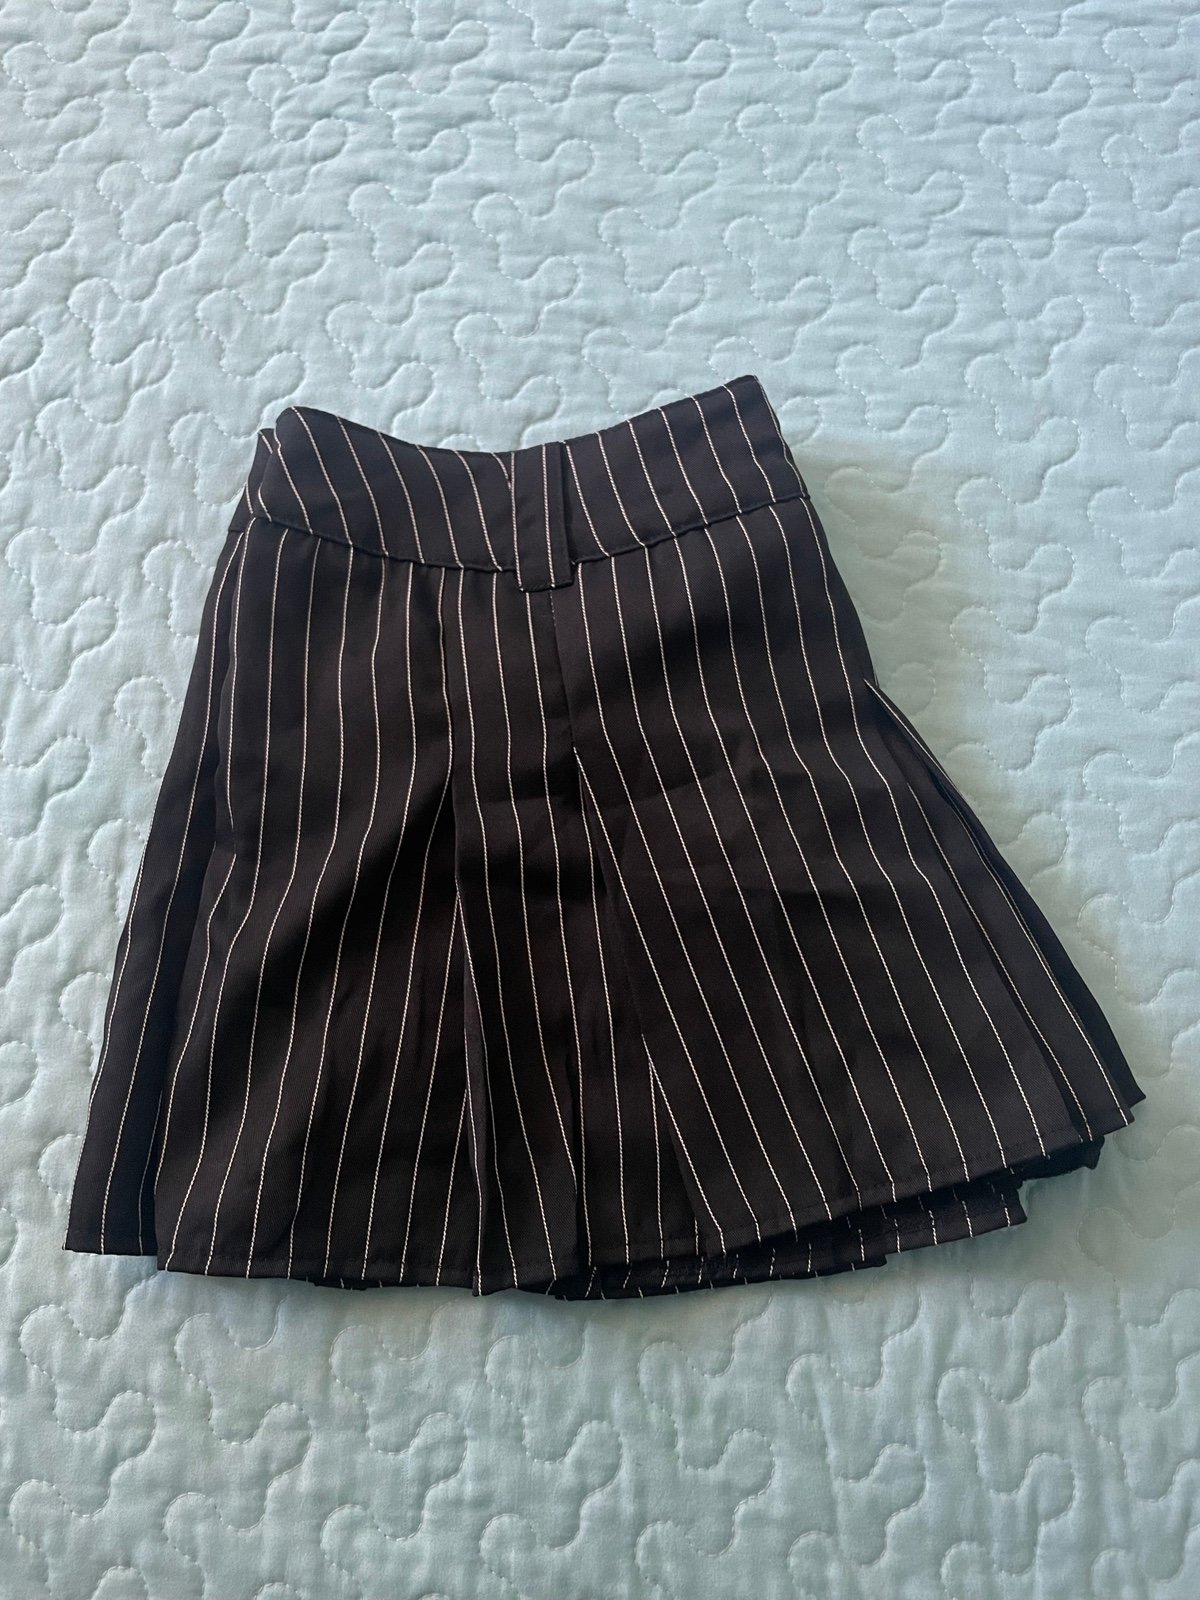 large discount mini skater skirt ovcefPwzx US Sale